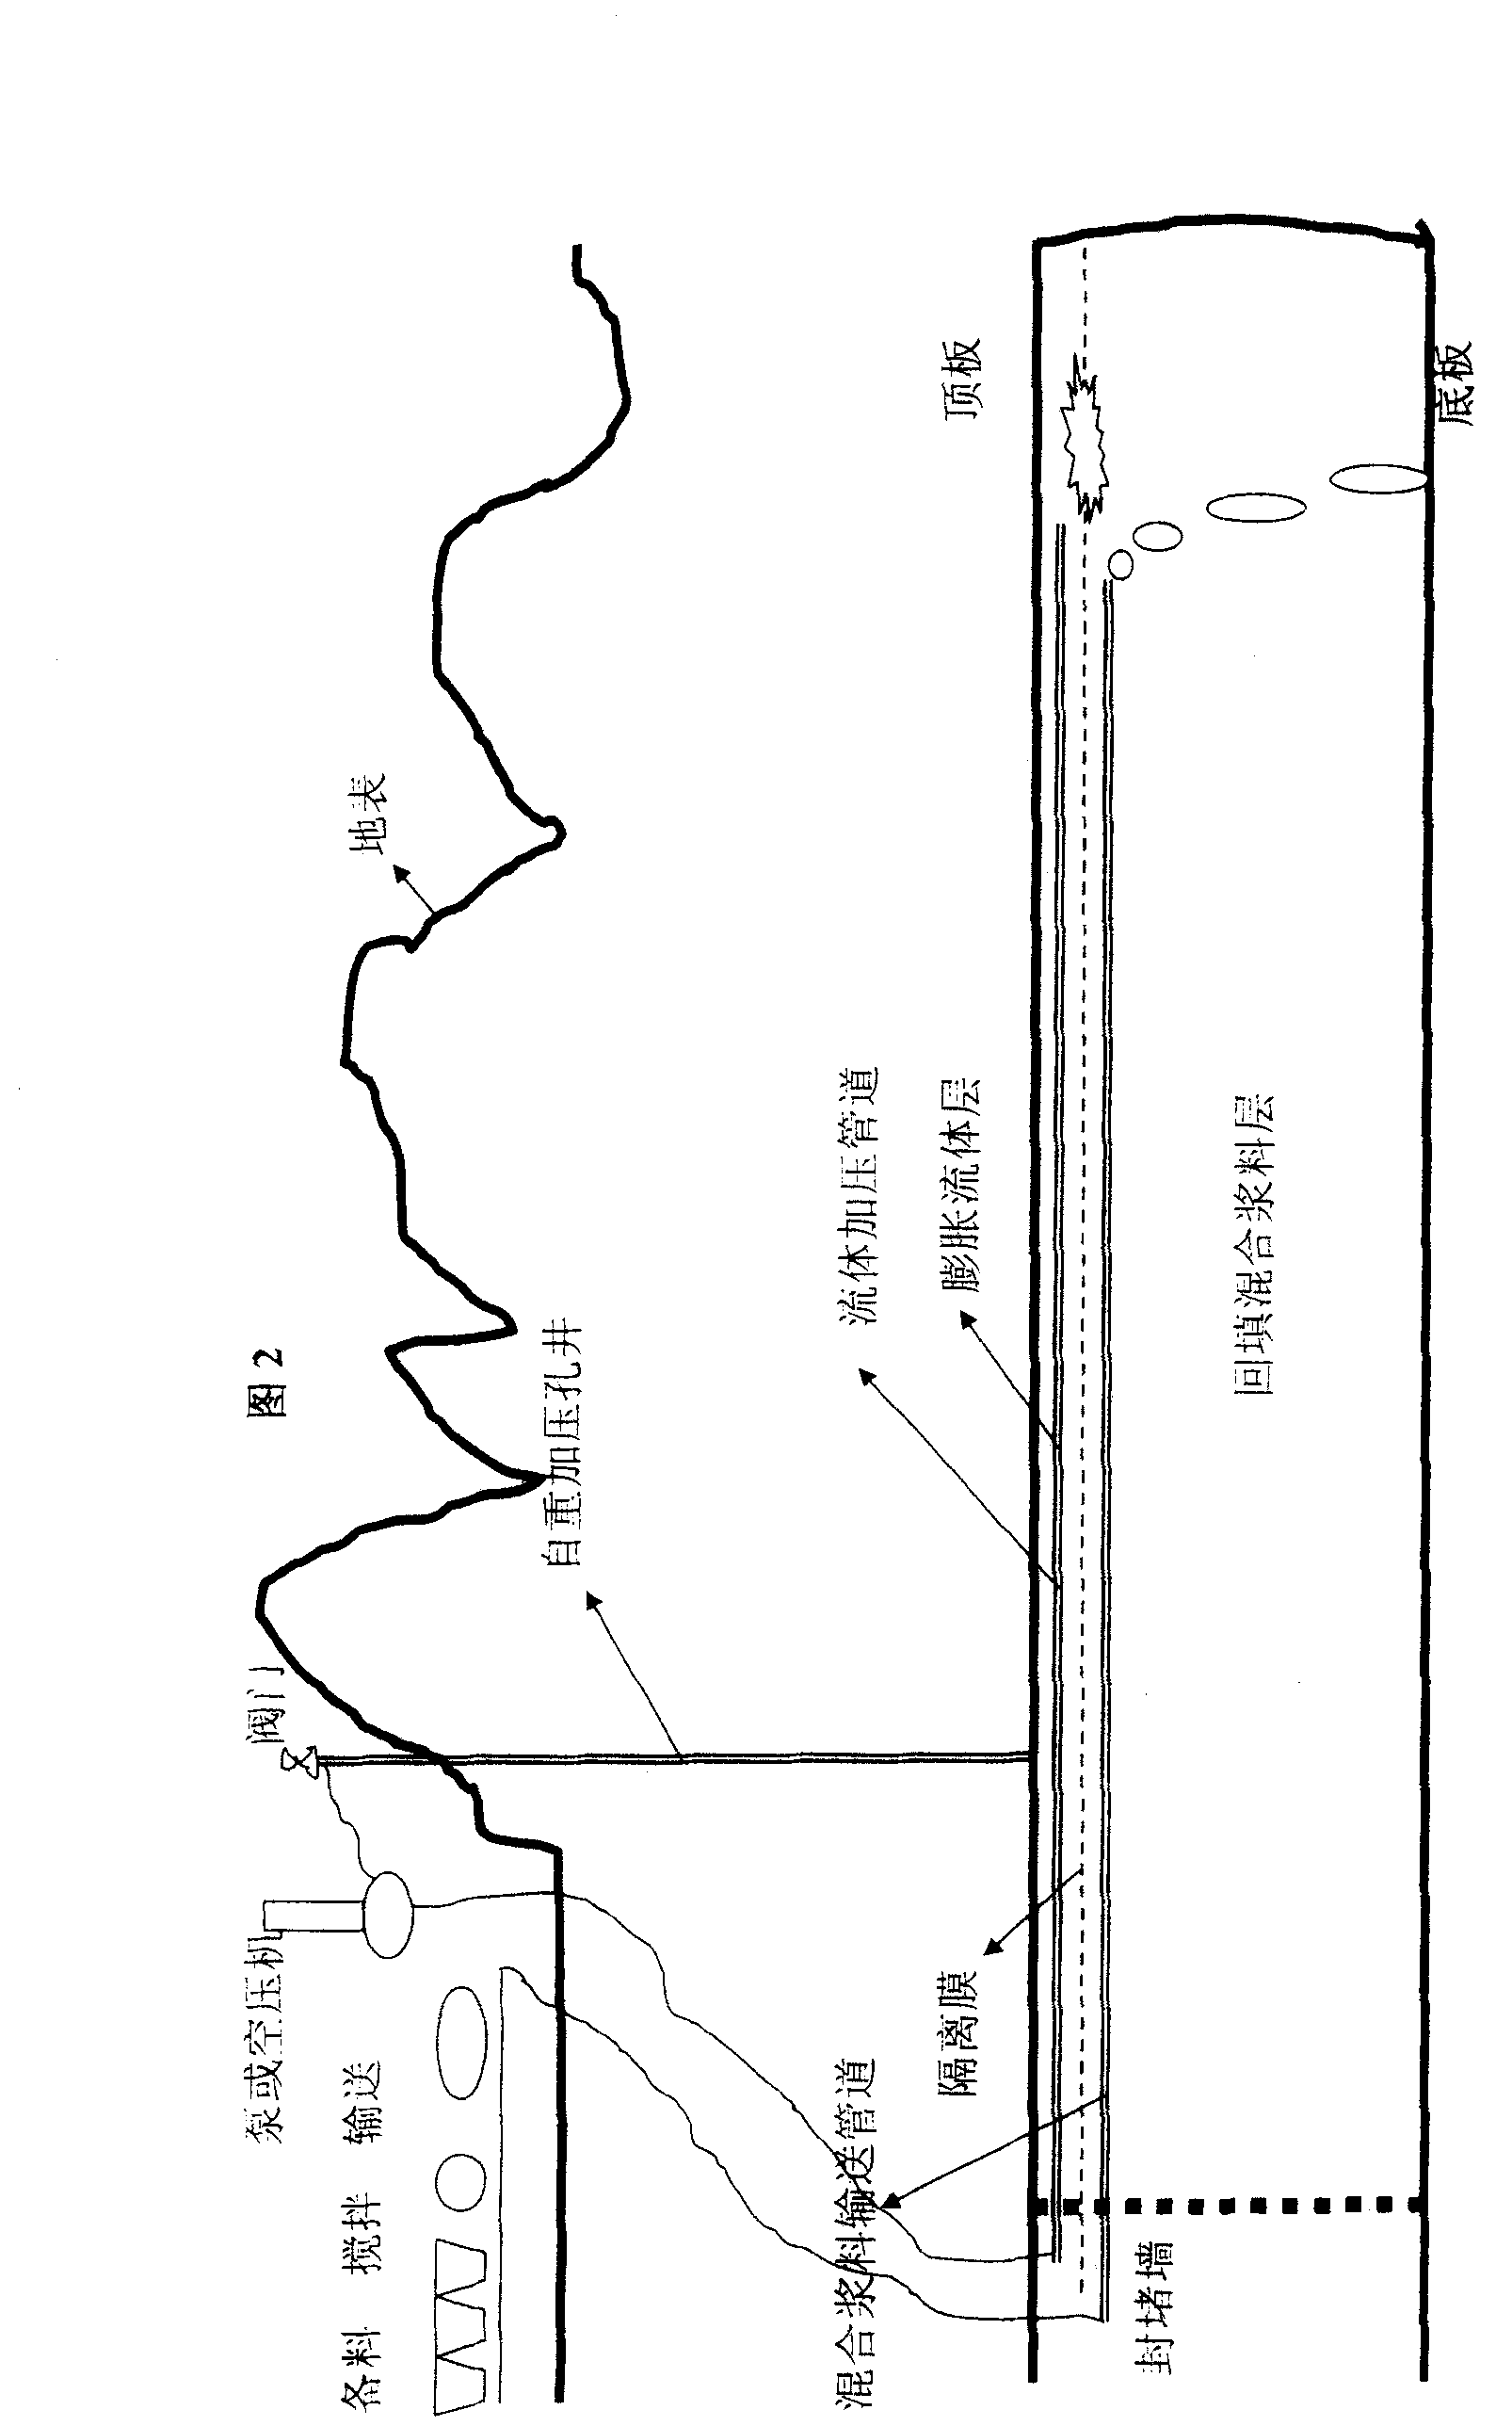 Method for backfilling goaf and supporting roof